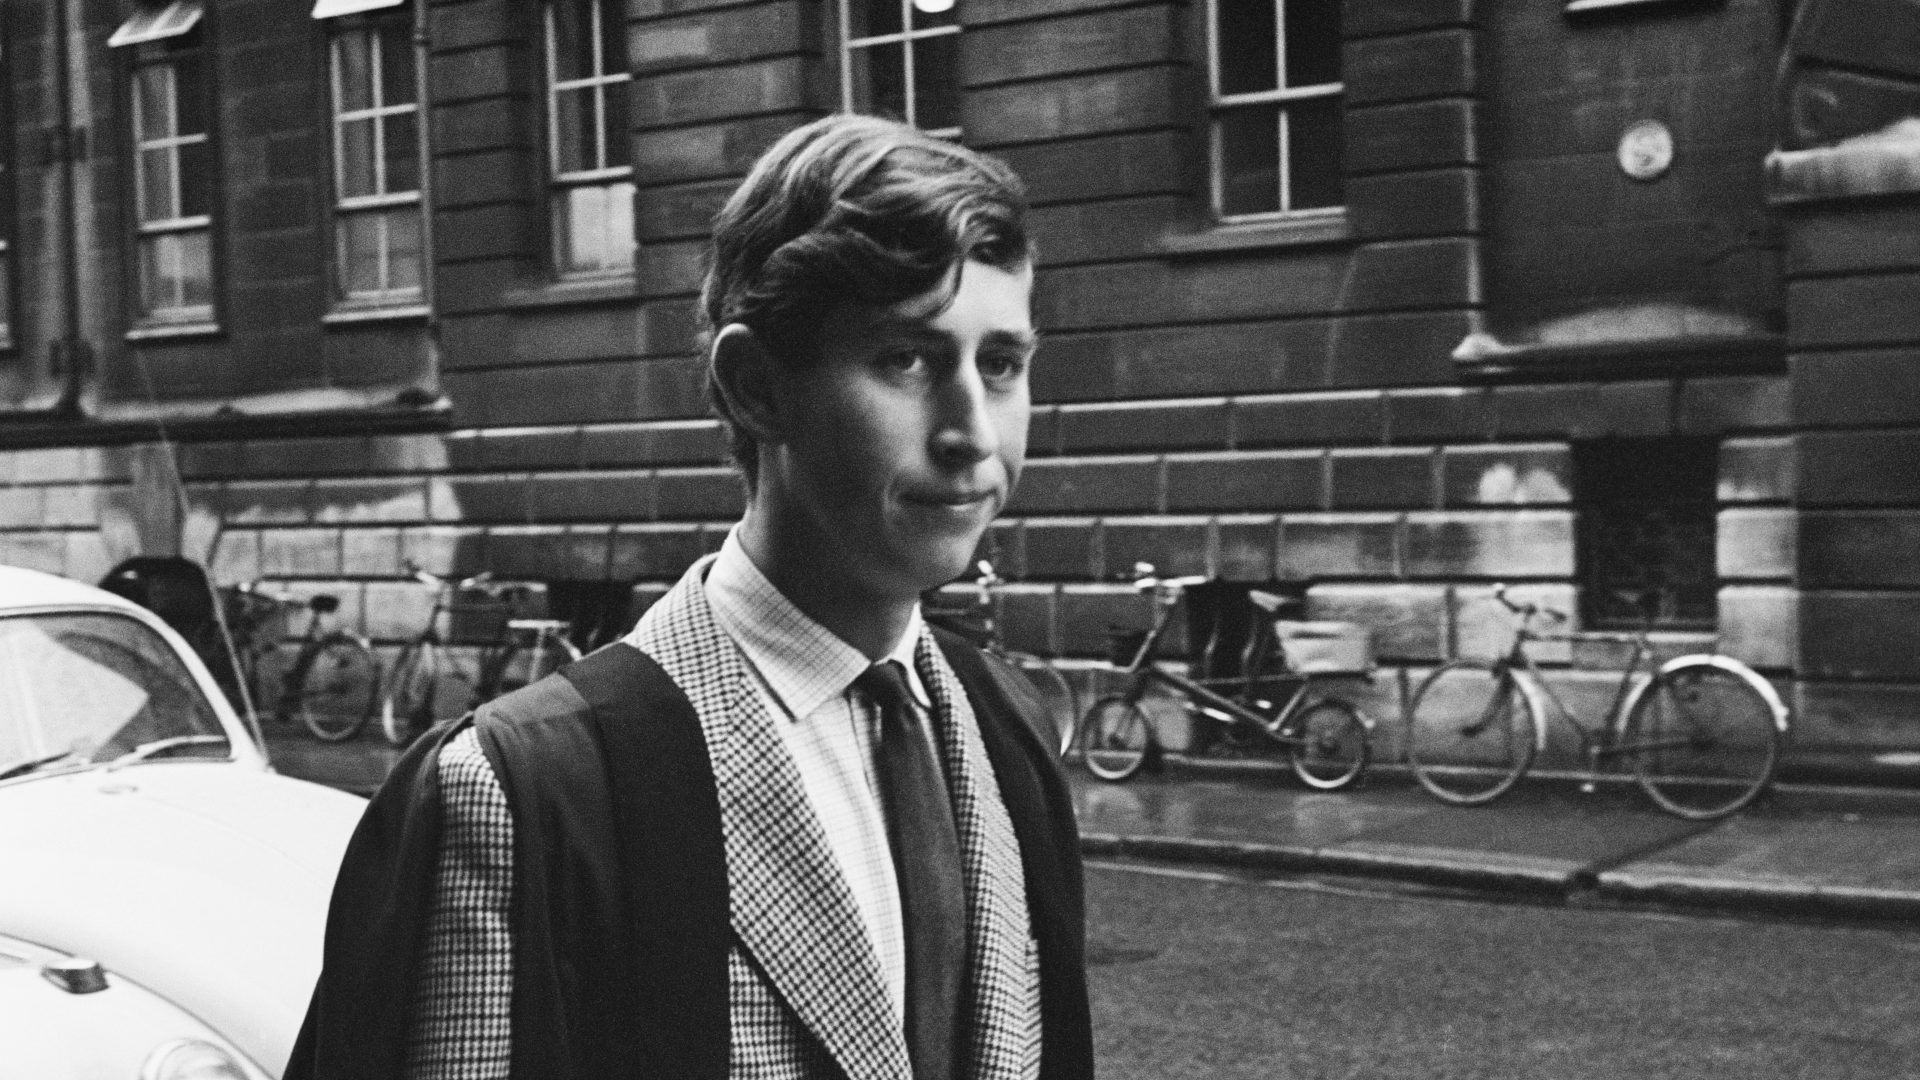  Prince Charles walking in Downing Street, Cambridge, UK, 12th October 1967. He is beginning his term at Trinity College. Photo: Peter Dunne/Daily Express/Getty Images
